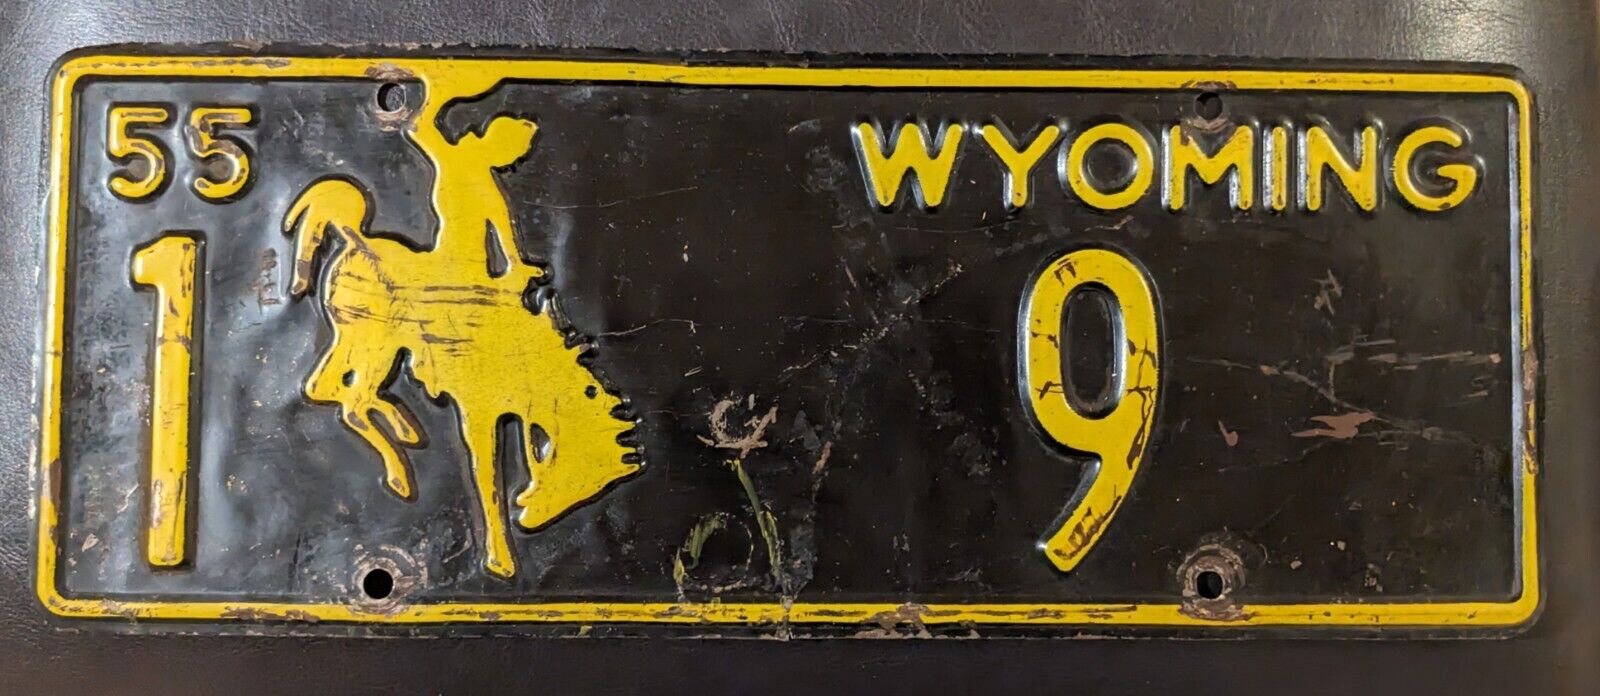 All Original 1955 Wyoming Passenger License Plate- No 9 One Digit County 1